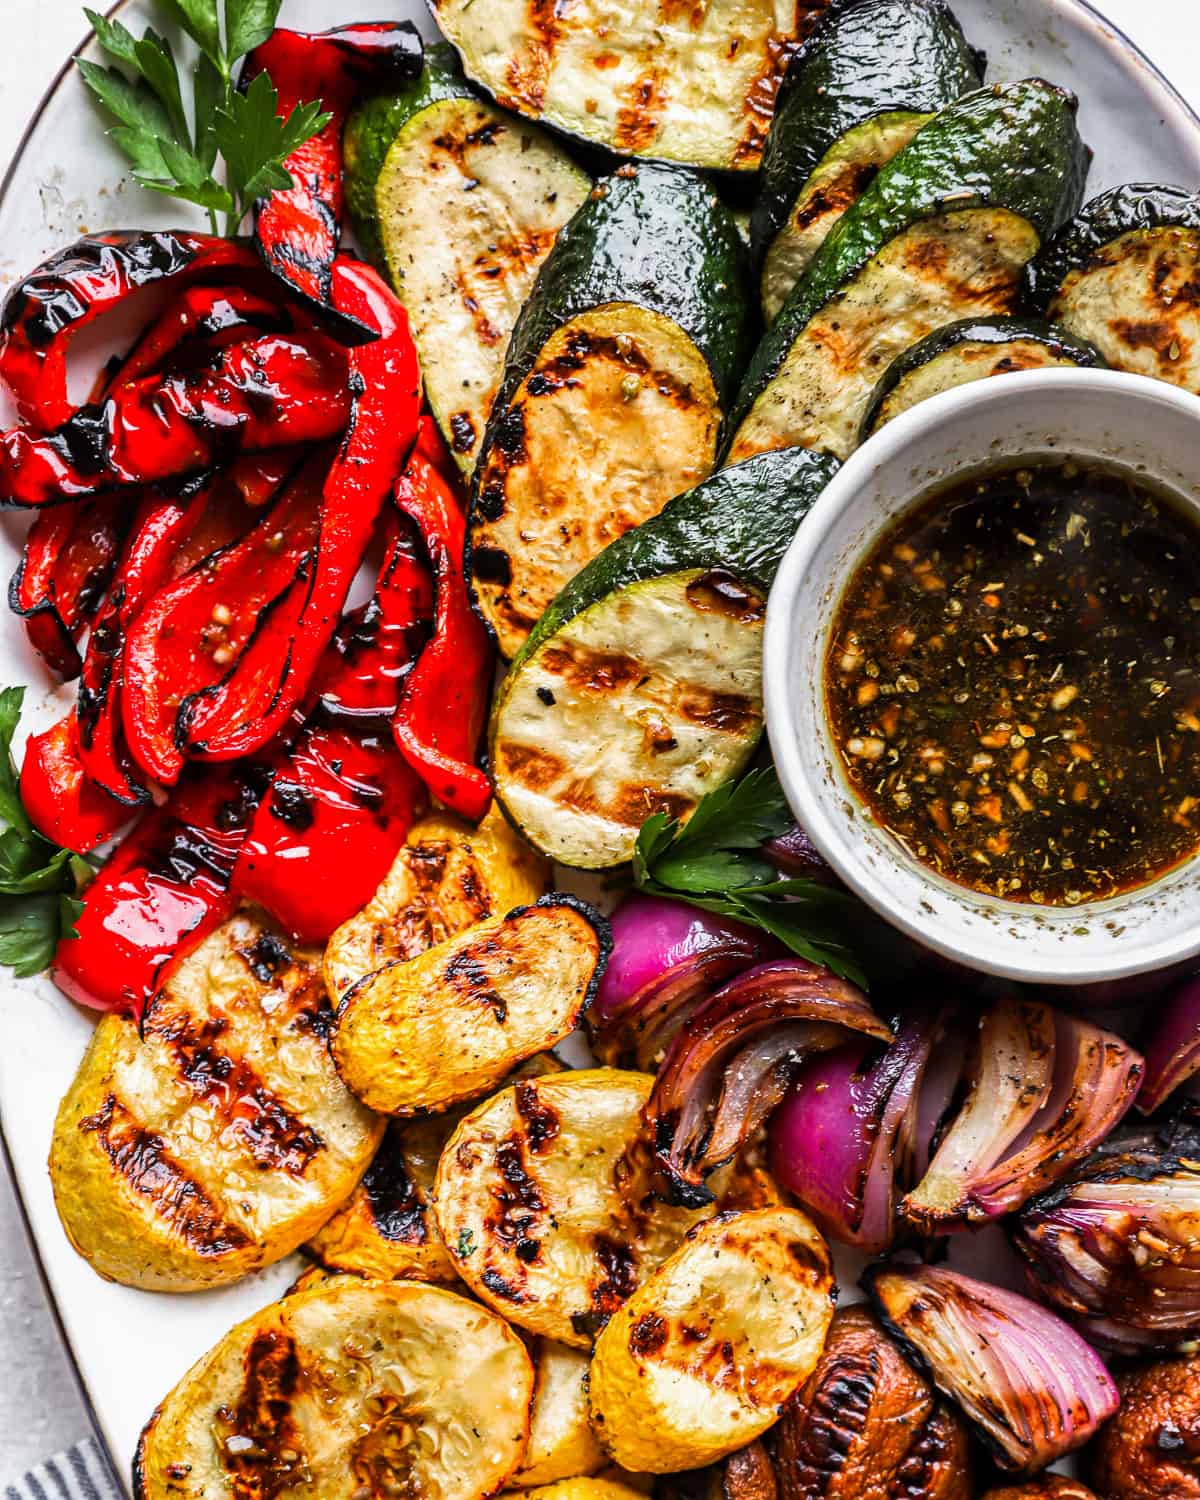 medium-distance overhead view of grilled vegetables on a white oval plate with marinade in a small bowl.